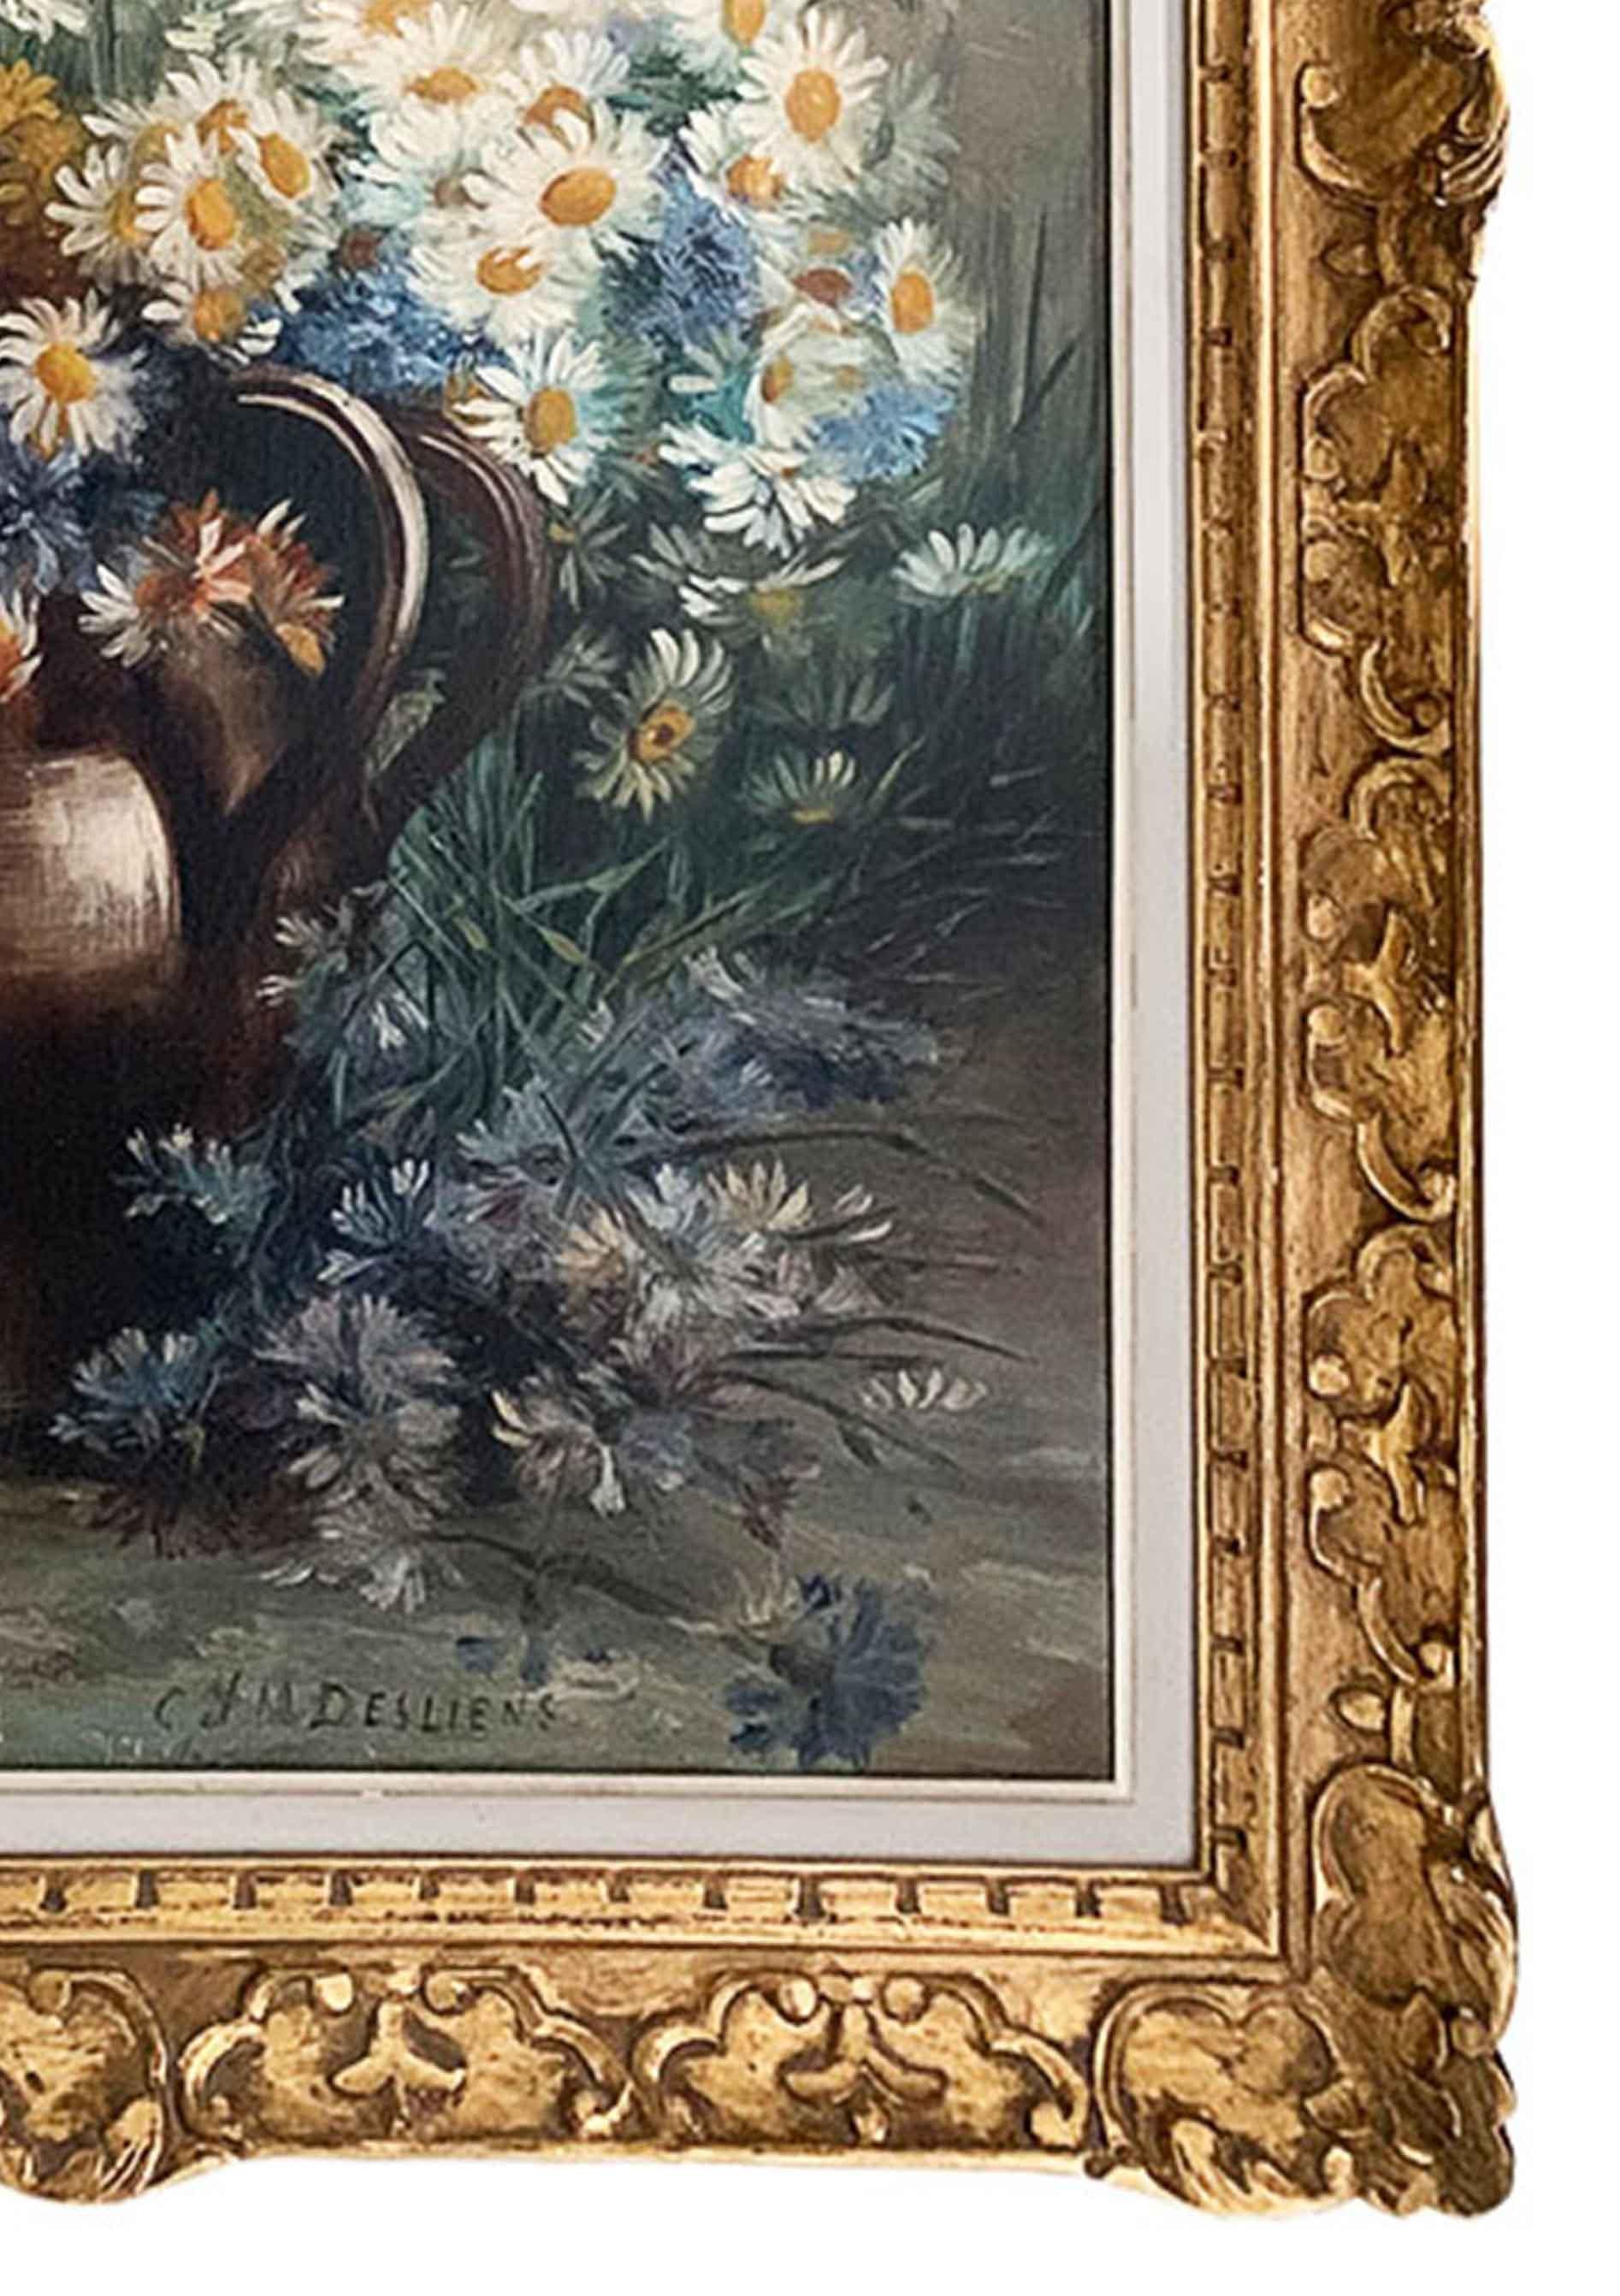 Hand-Painted 19th Century Oil on Canvas from Desliens Sisters Cécile and Marie 